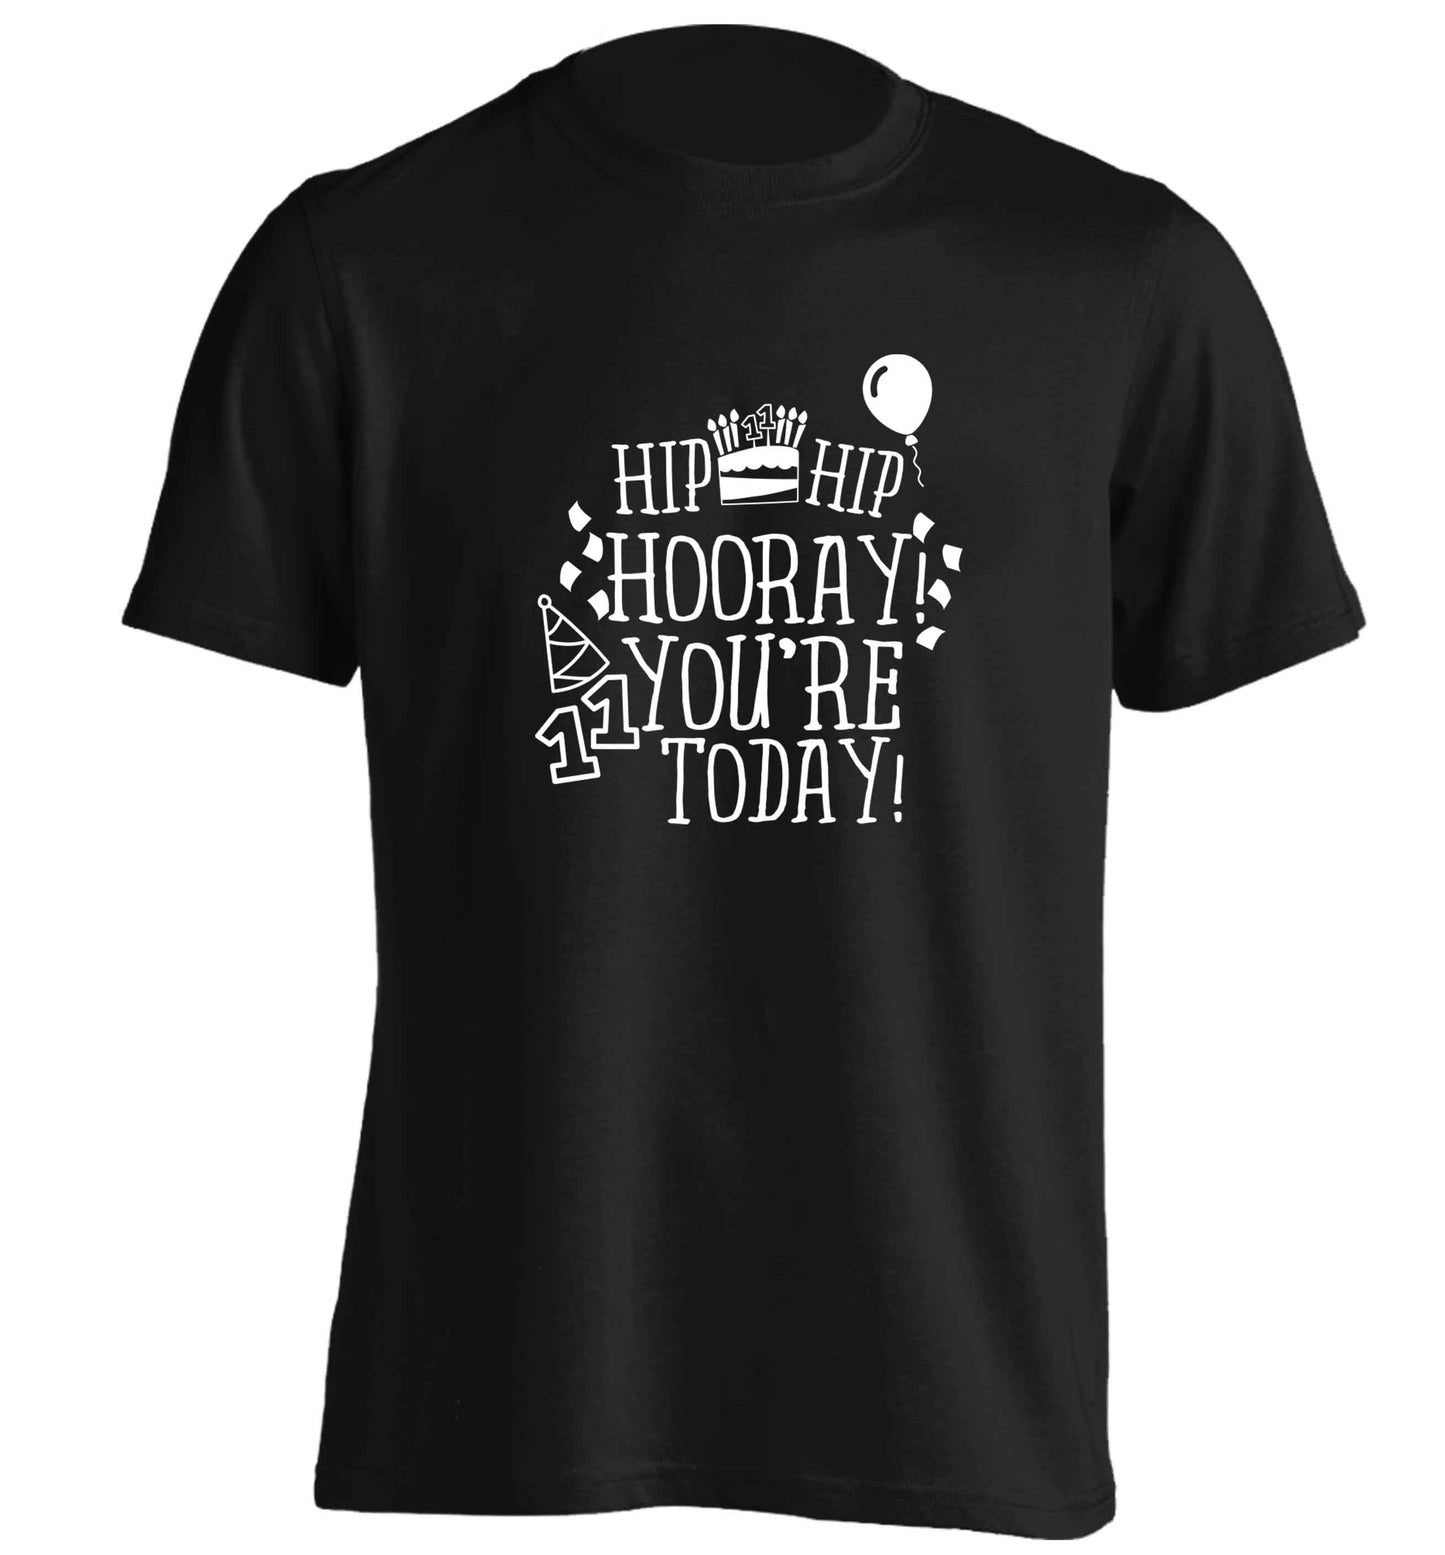 Hip hip hooray I you're eleven today! adults unisex black Tshirt 2XL